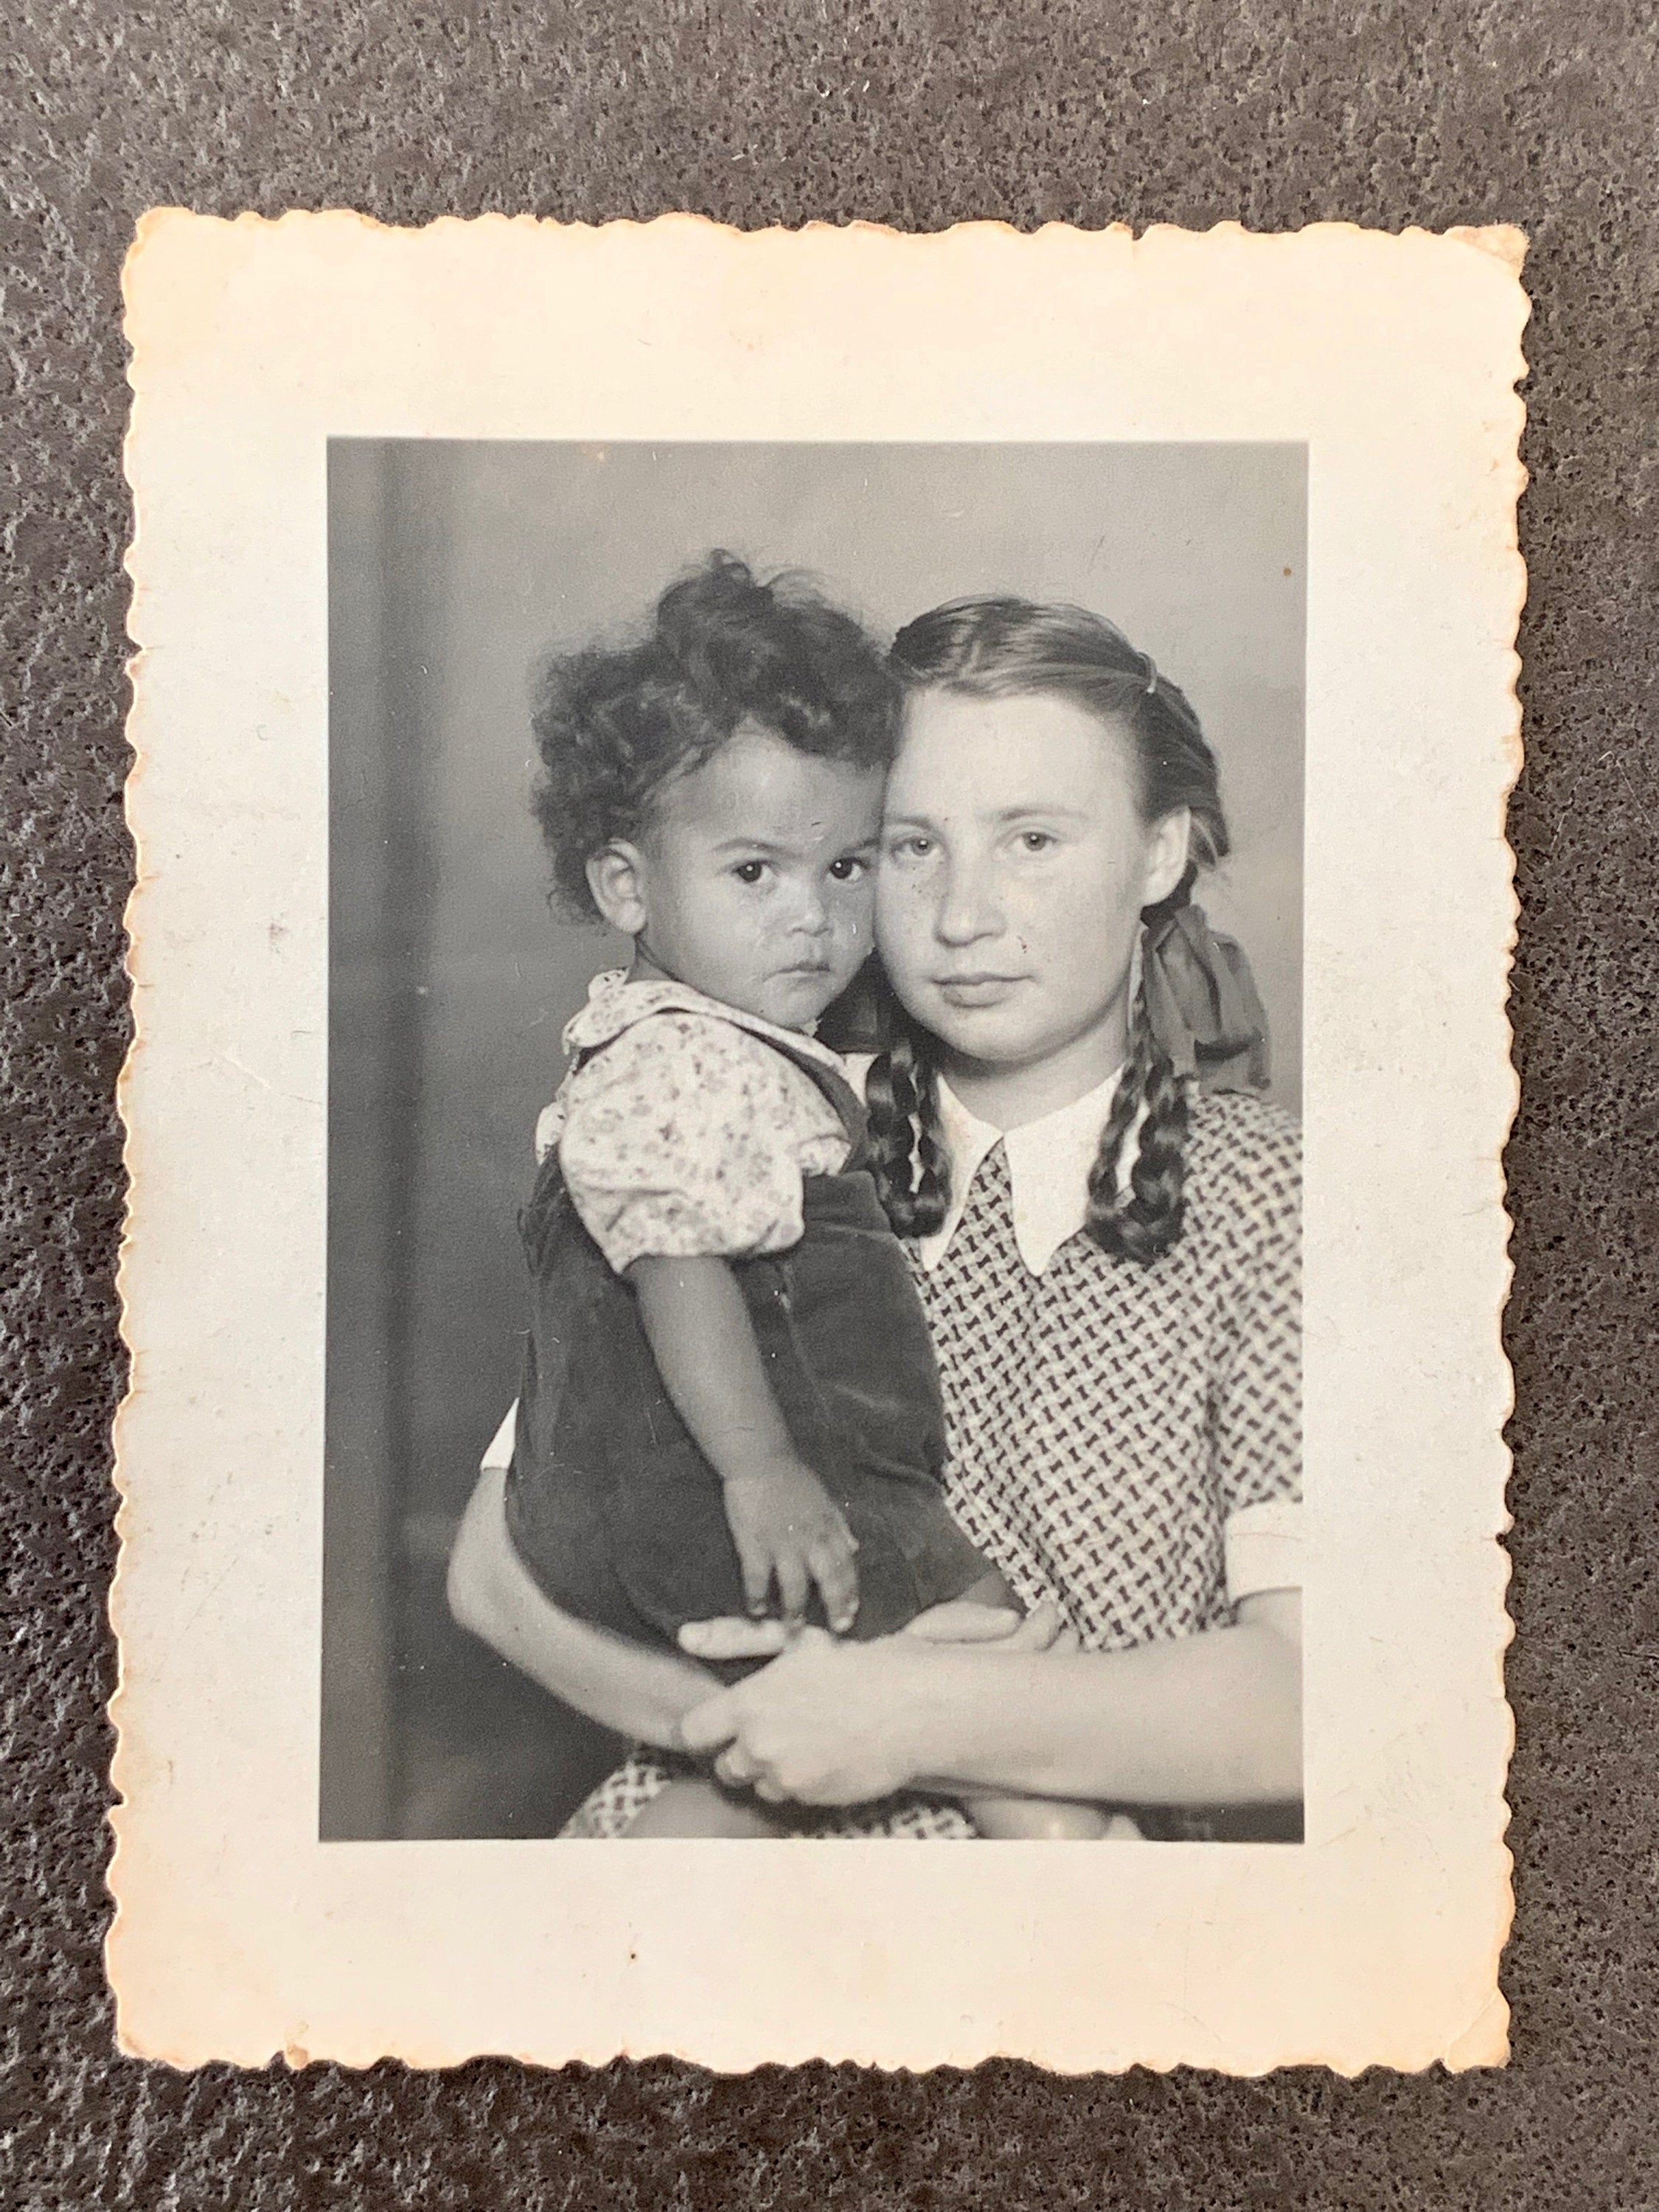 Vintage Photography Portrait of Siblings Black White Multiracial Biracial Germany